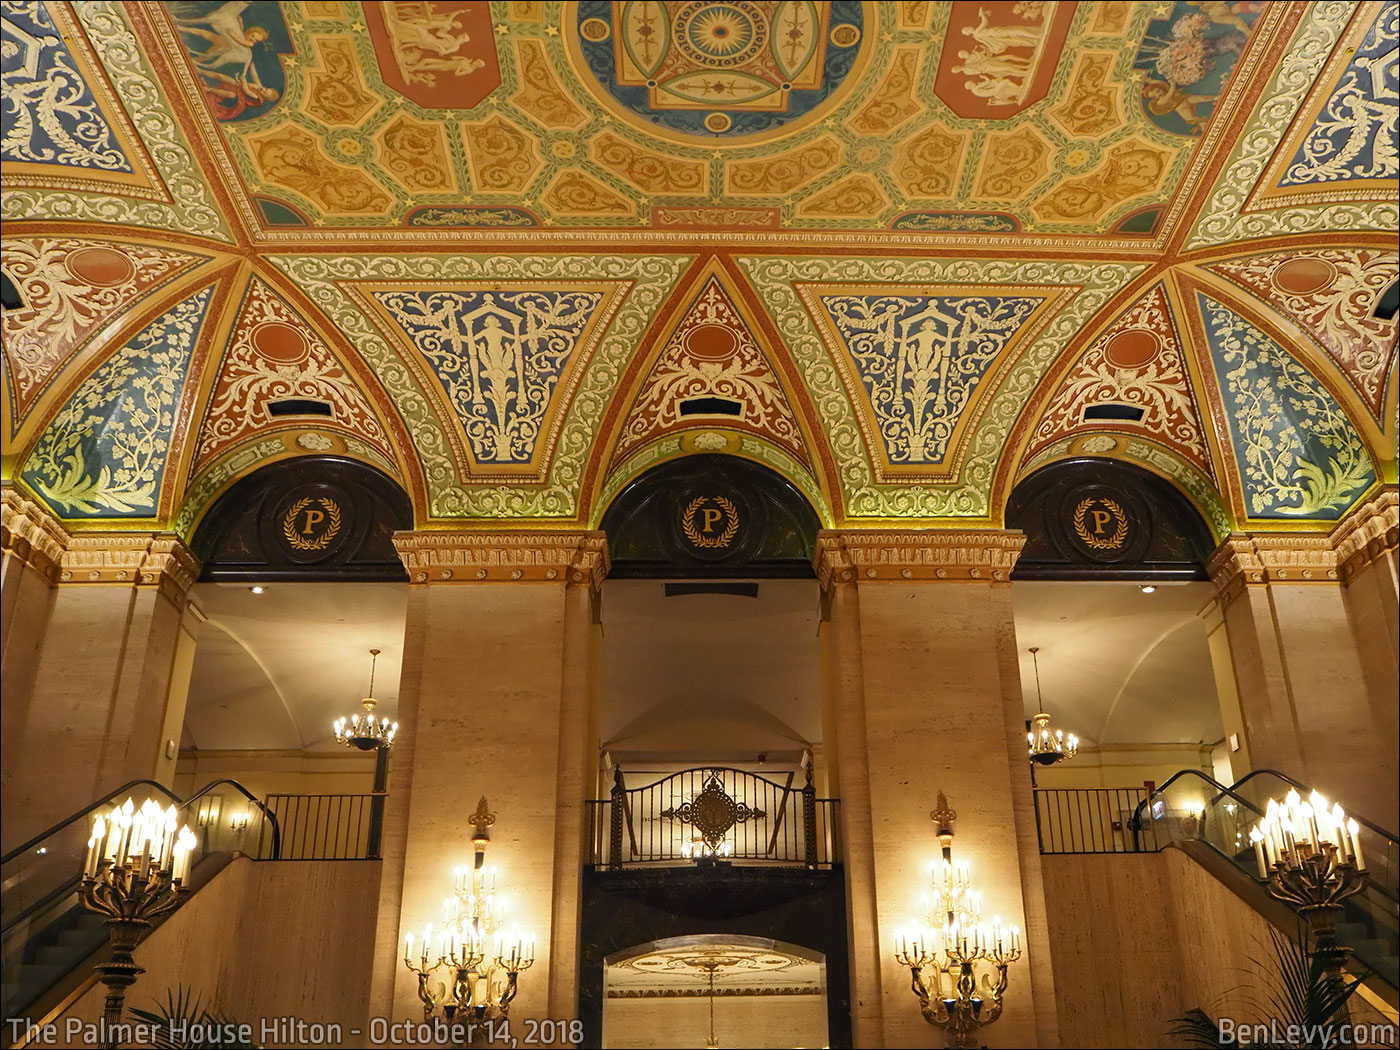 Ceiling of the lobby of the Palmer House Hilton